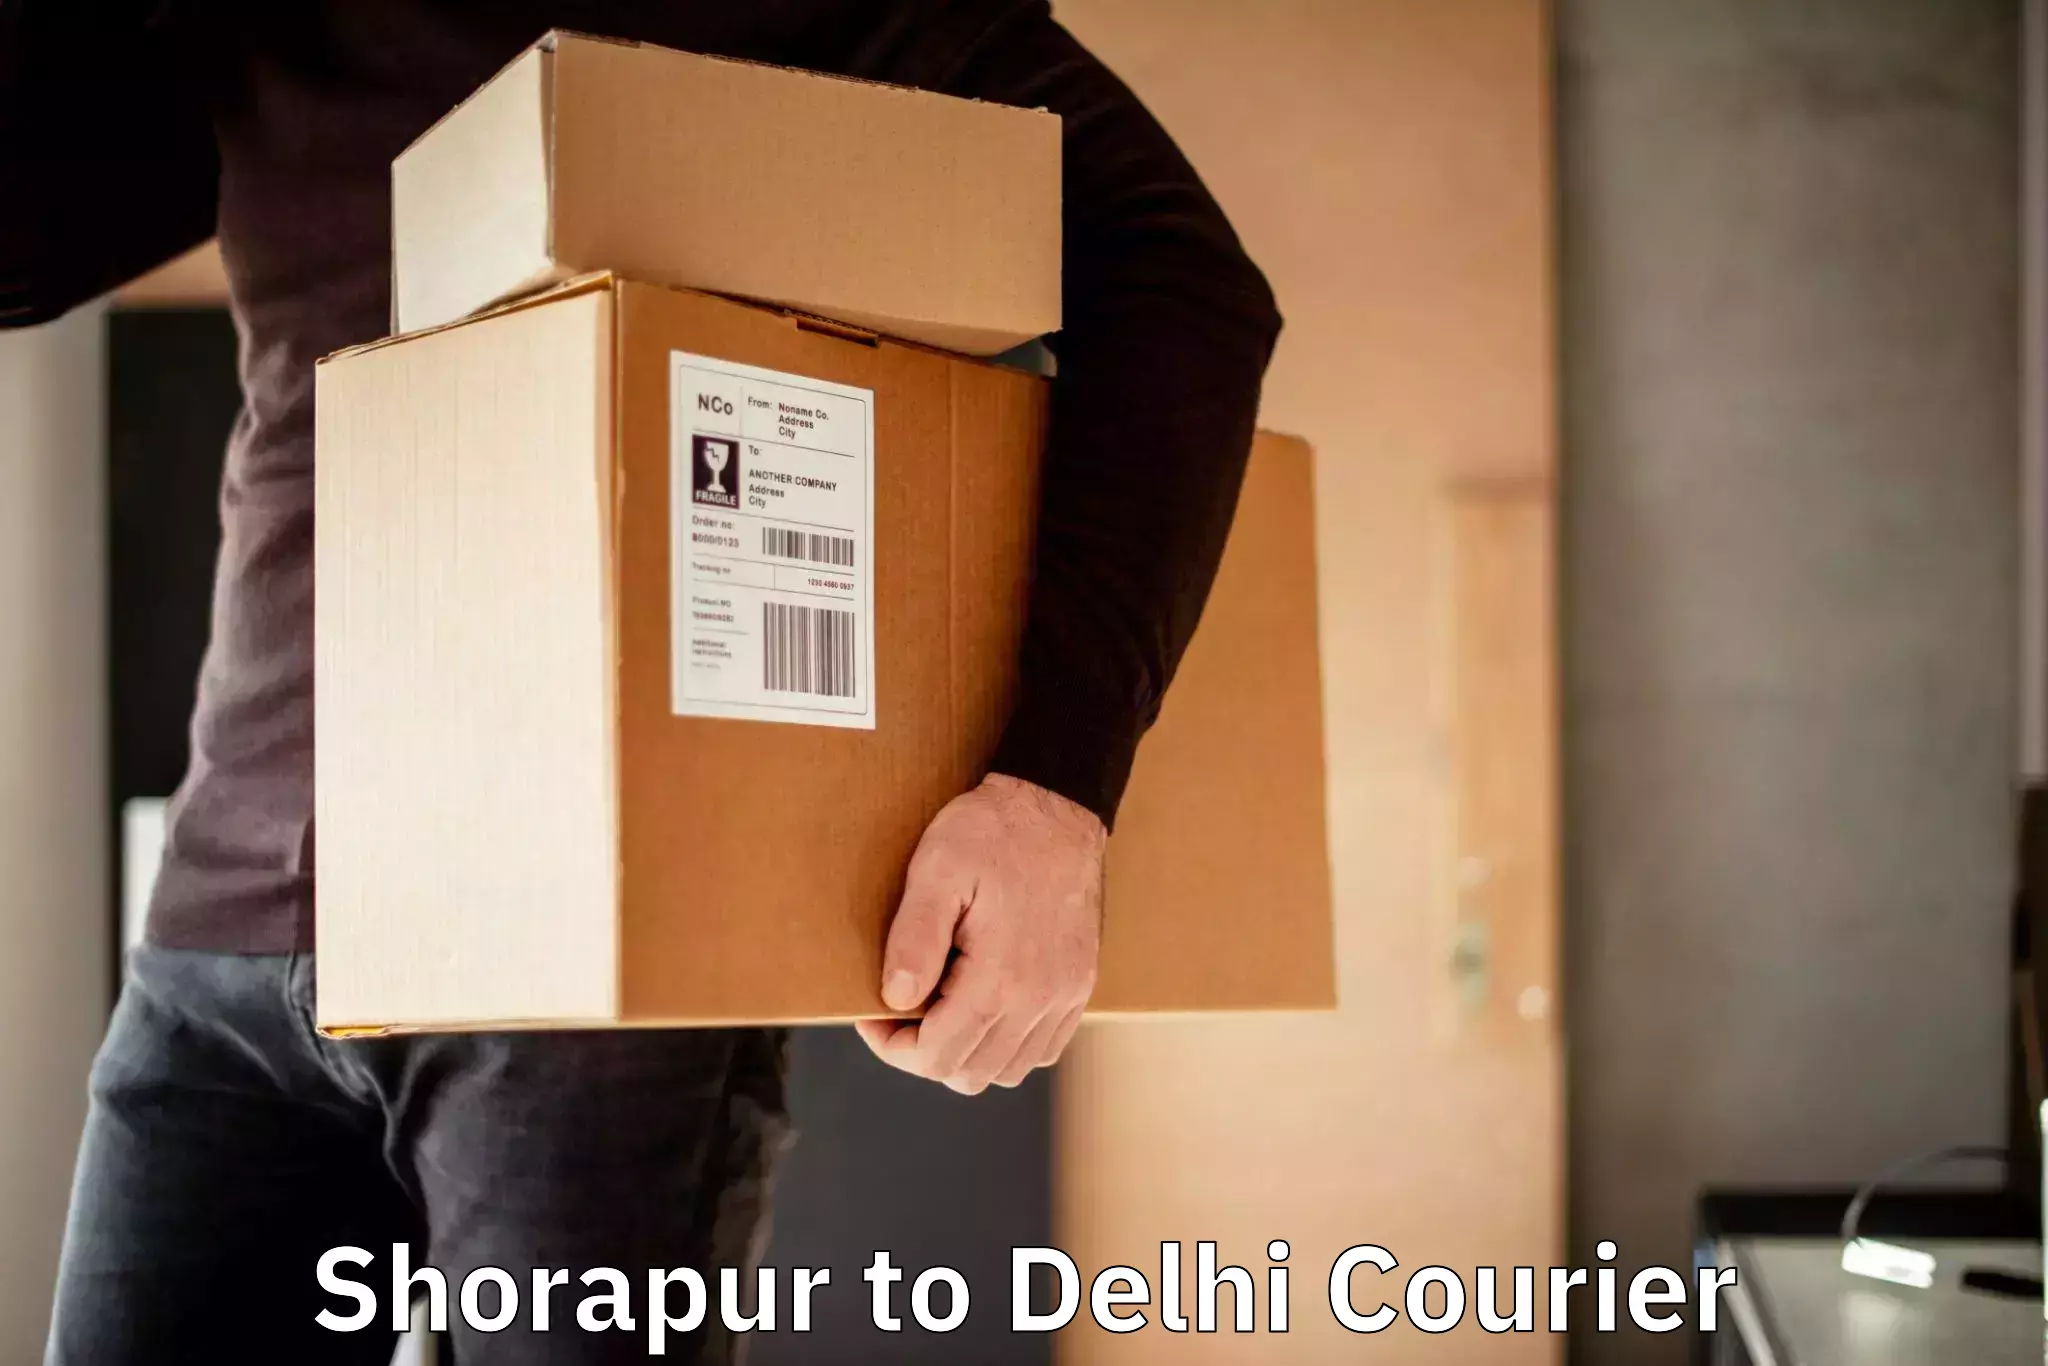 Fast delivery service Shorapur to NCR